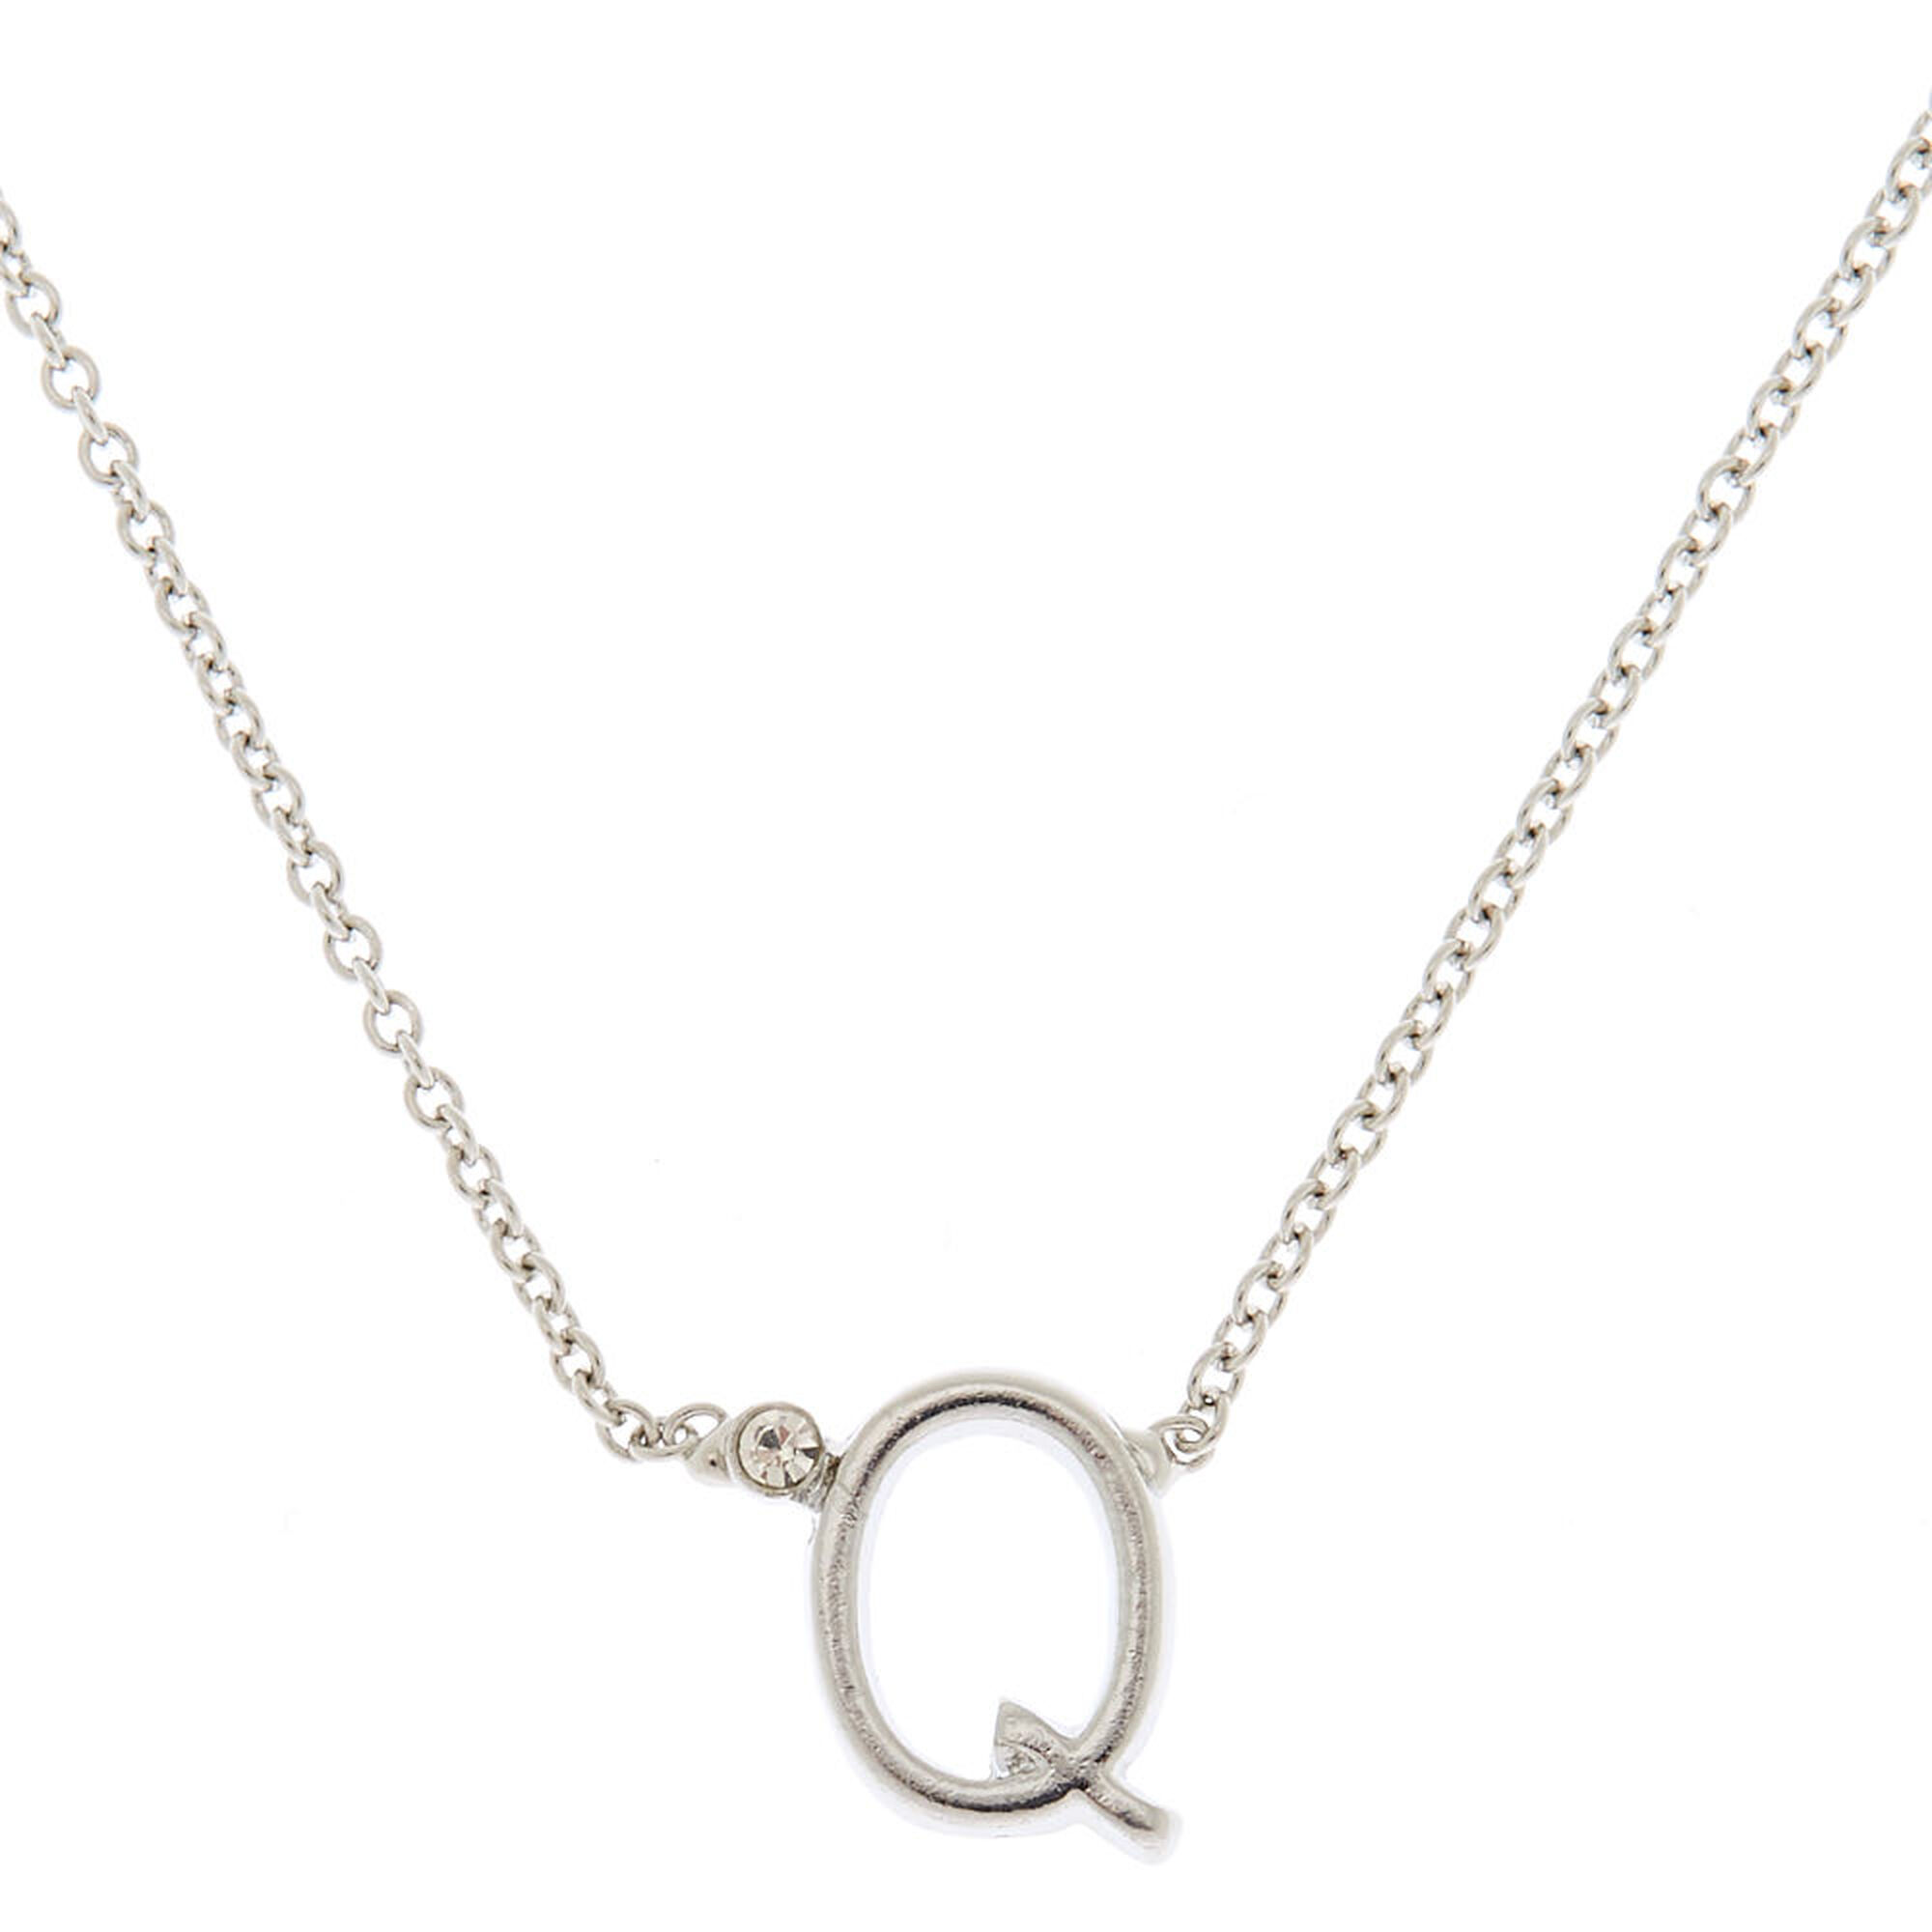 View Claires Tone Stone Initial Pendant Necklace Q Silver information